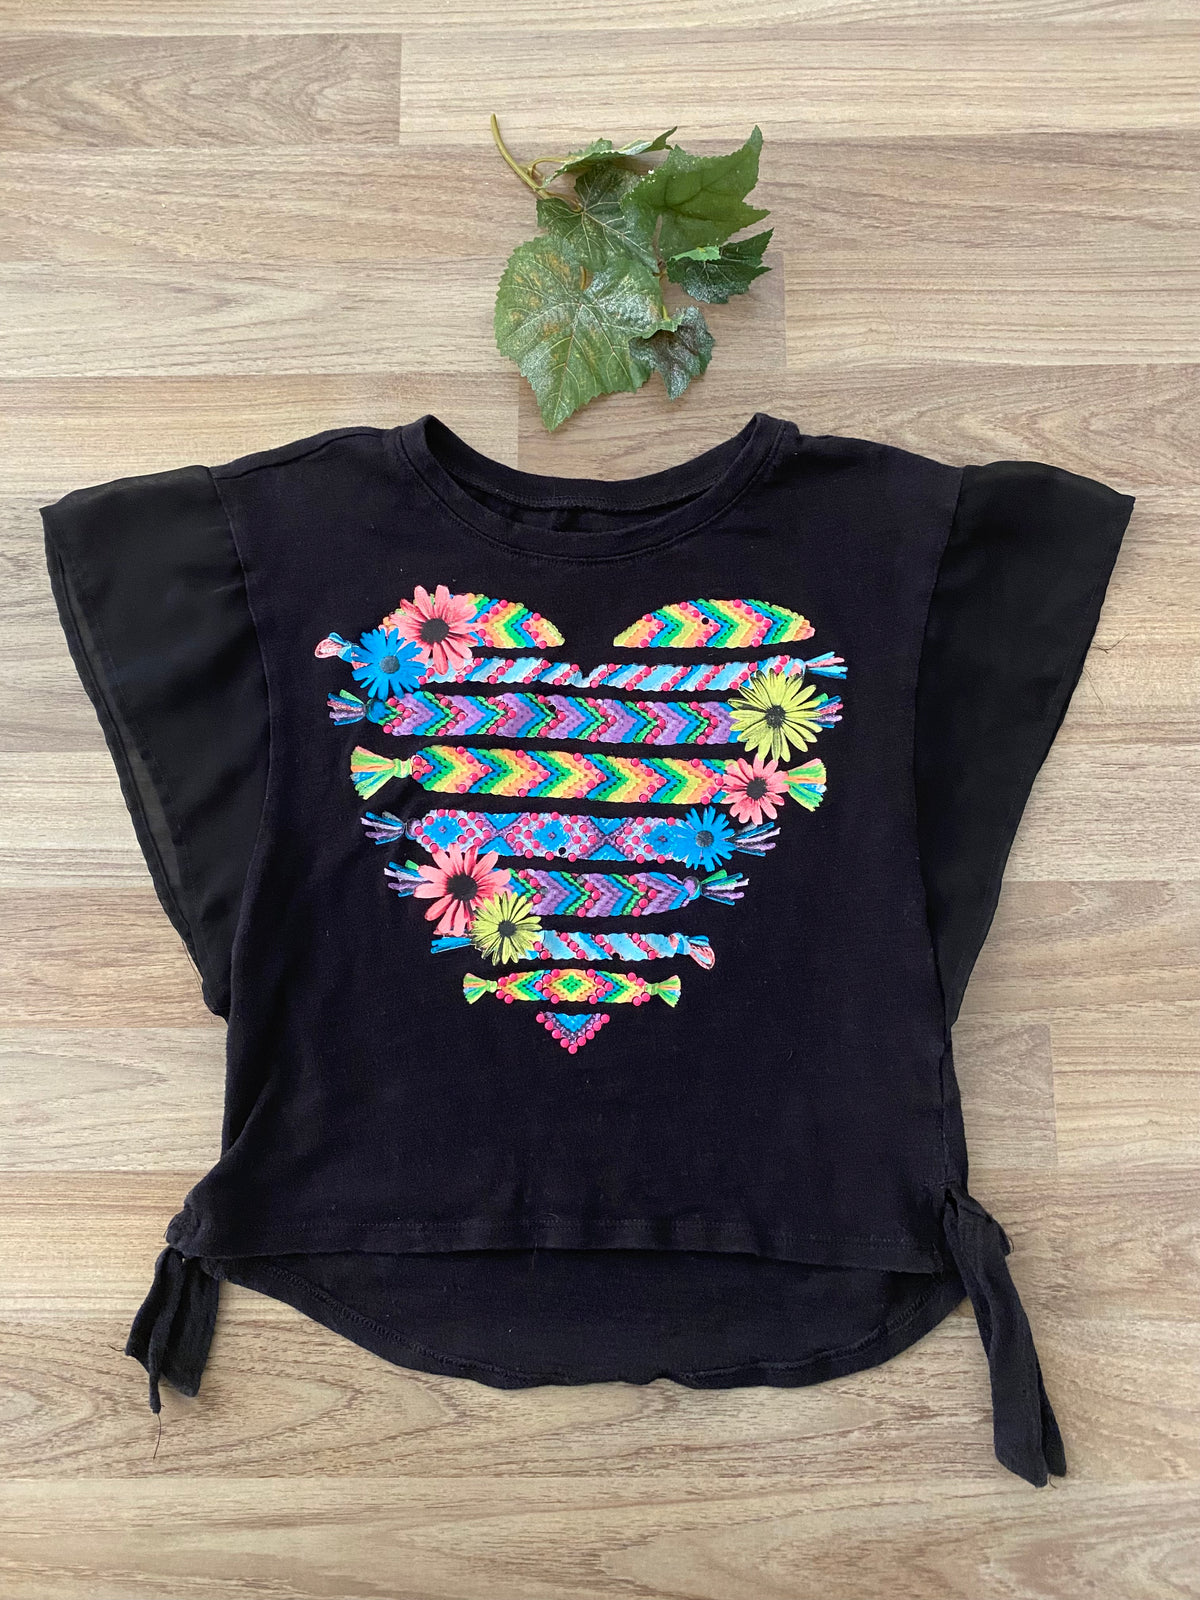 Short Sleeve Graphic Top (Girls Size 7)